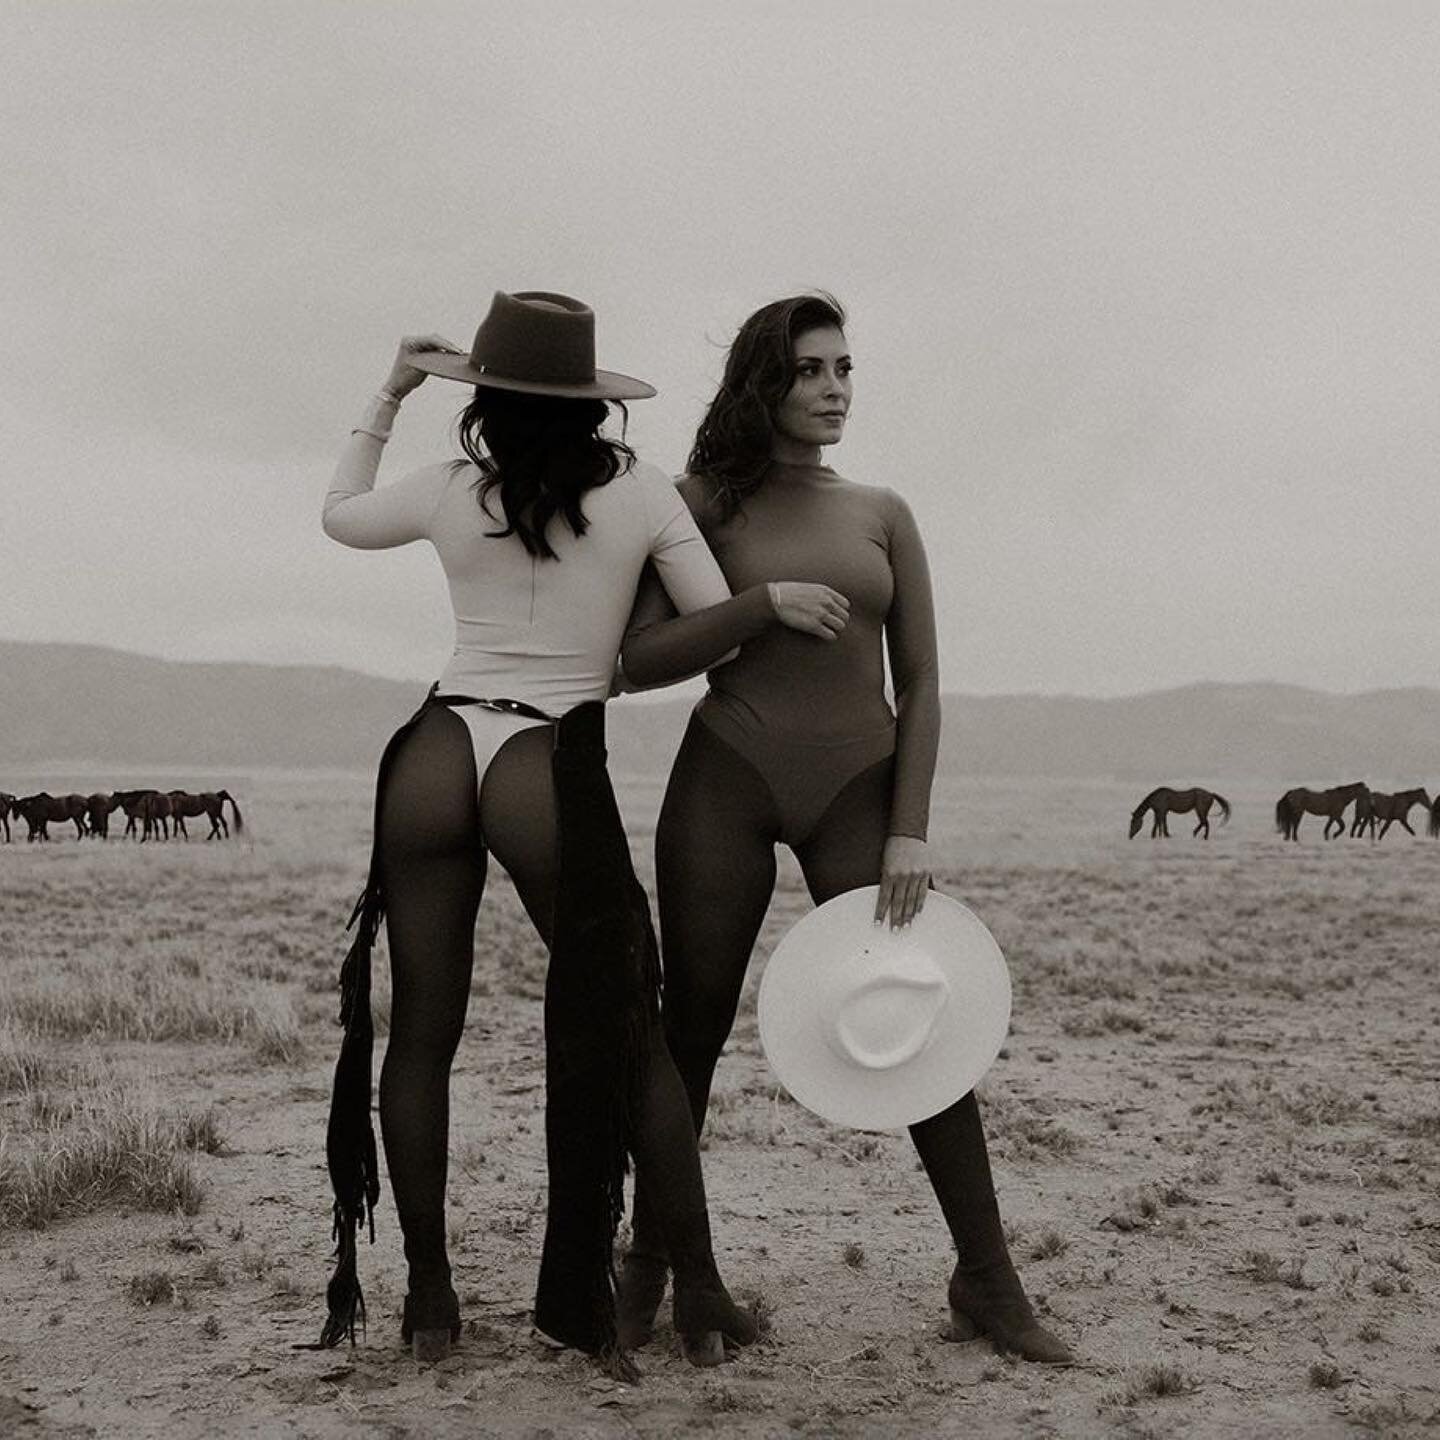 Our recent photoshoot with Olive and Pique @oliveandpique was a wild ride! We journeyed to the stunning New Mexico desert with two fierce baddies, each rocking a different hat from the collection. Against the backdrop of endless desert, they stood ta